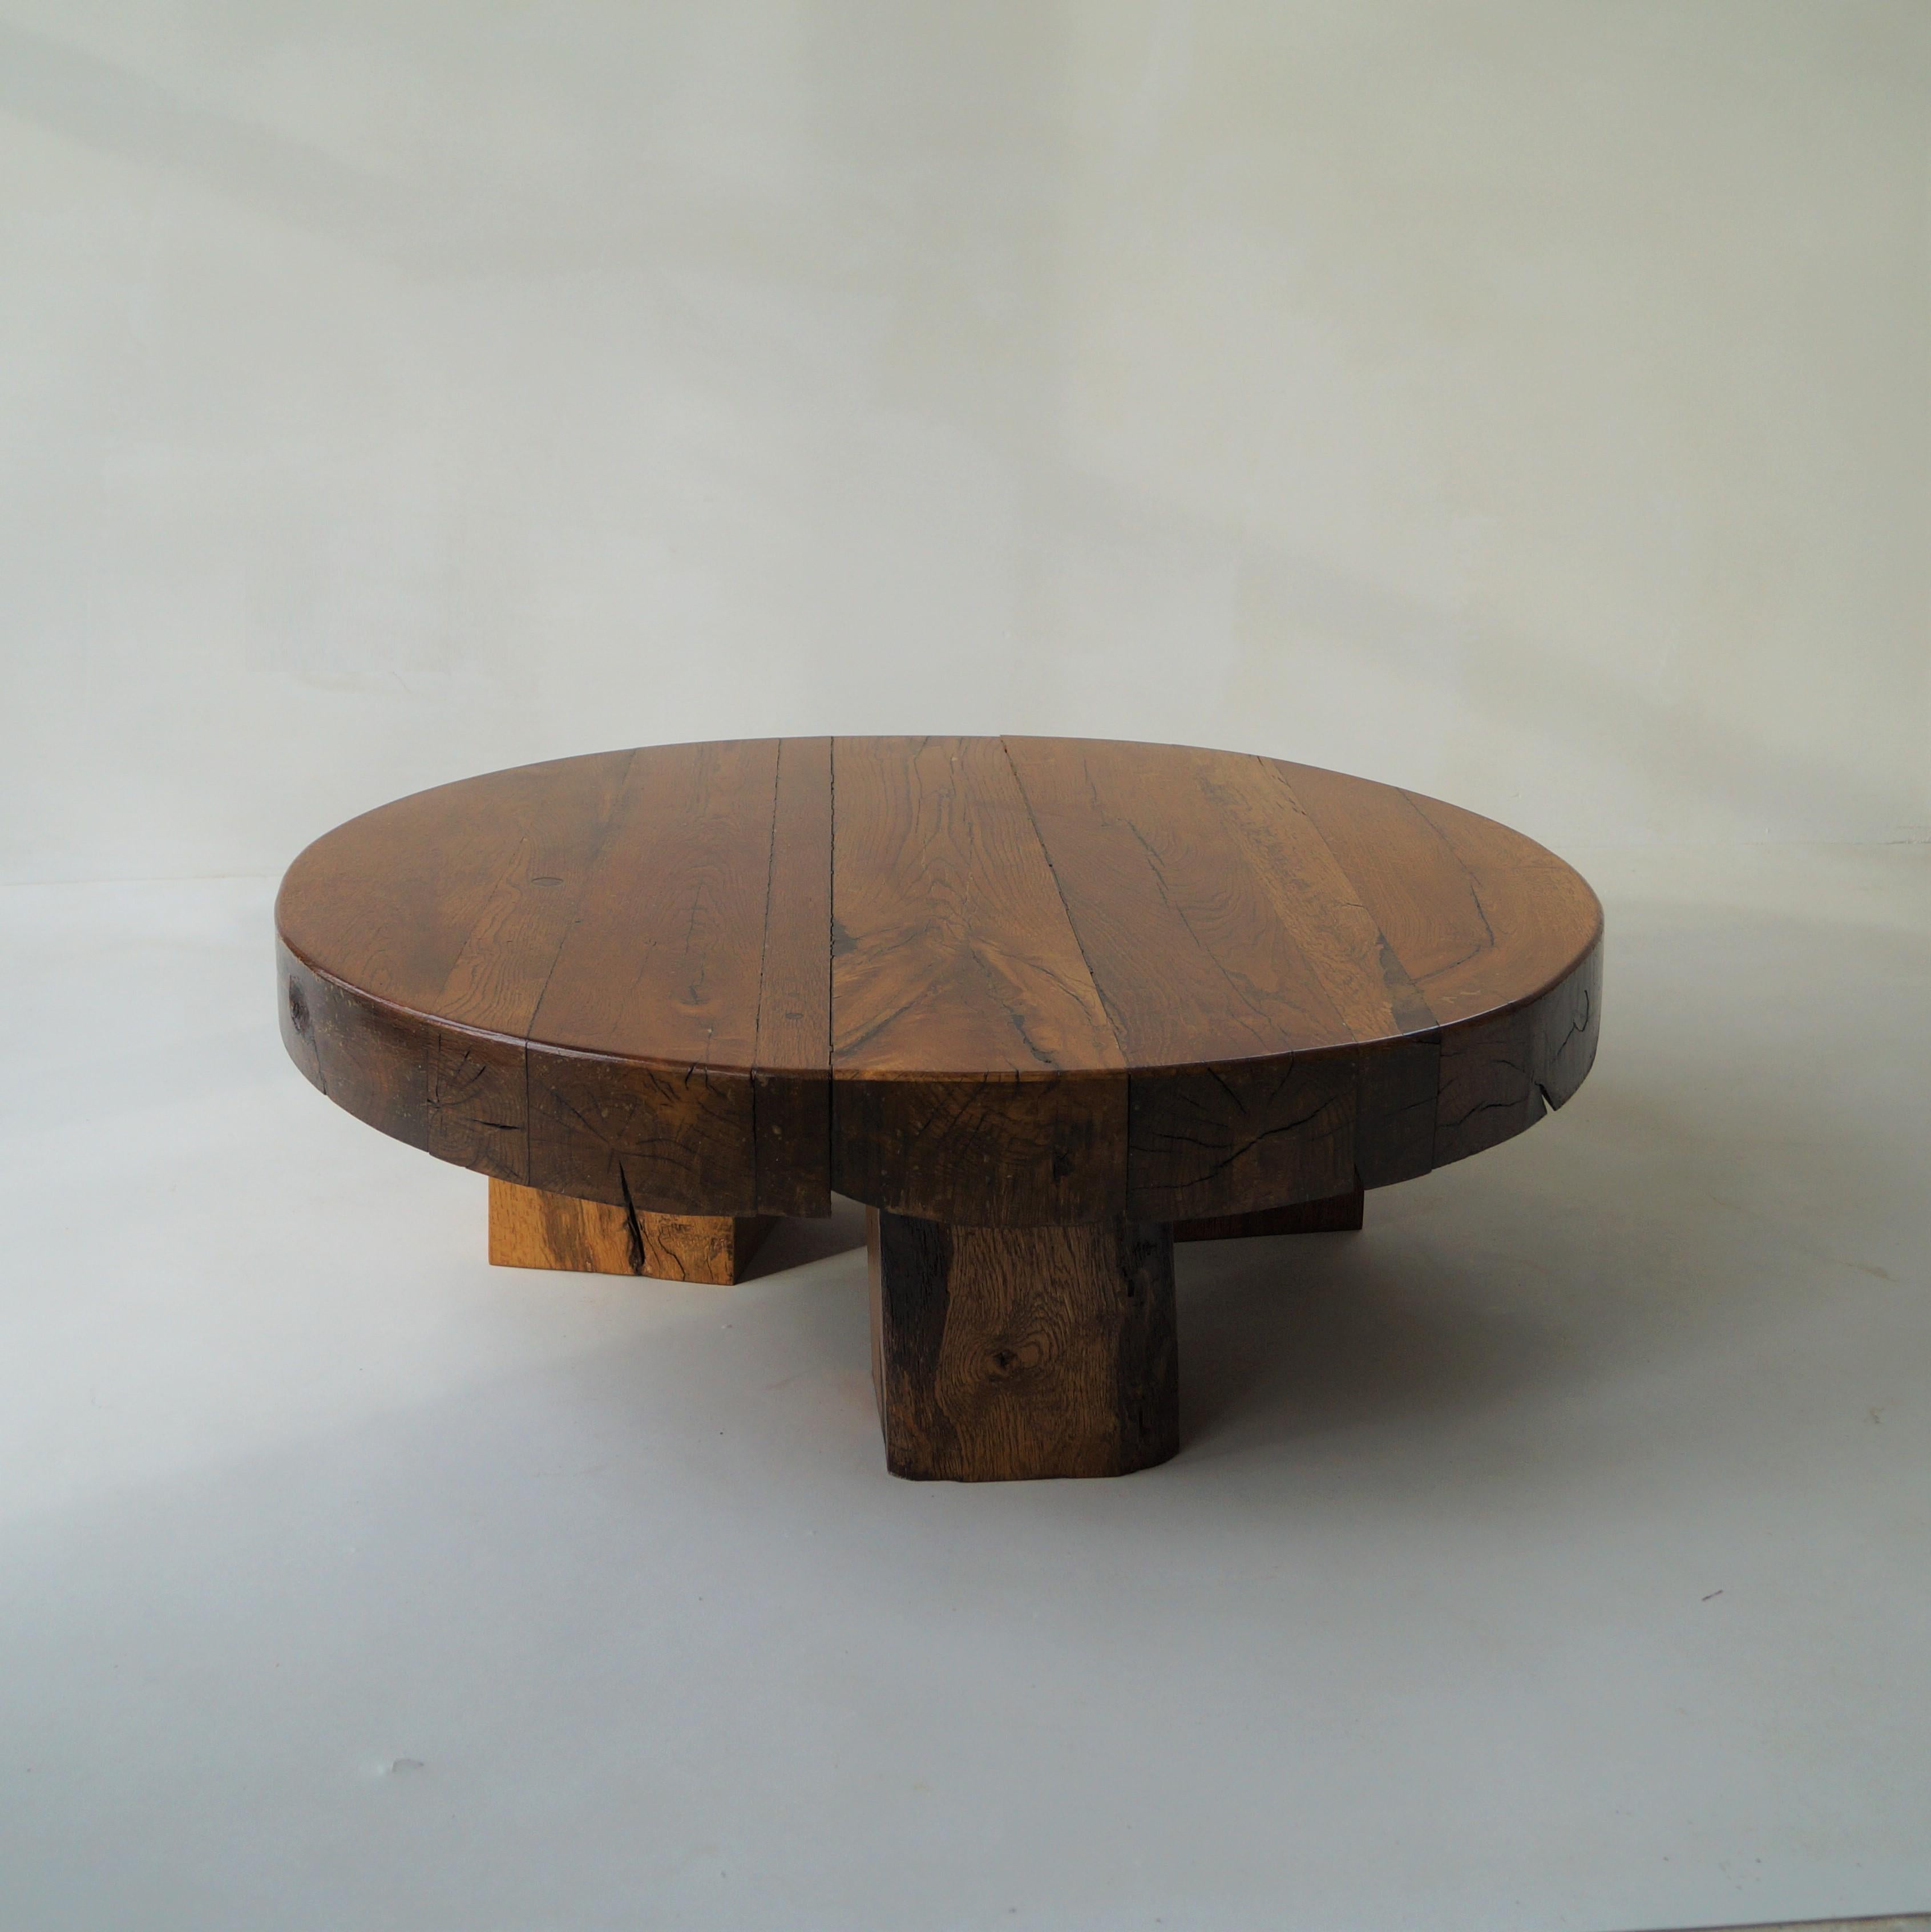 Dutch artisan 1970s solid wooden coffee table, with a thick wooden tabletop on three solid logs as table legs. Robust and organic design, in style of Charlotte Perriand and Pierre Chapo. Tabletop is more than 10 cm thick. The piece is in good